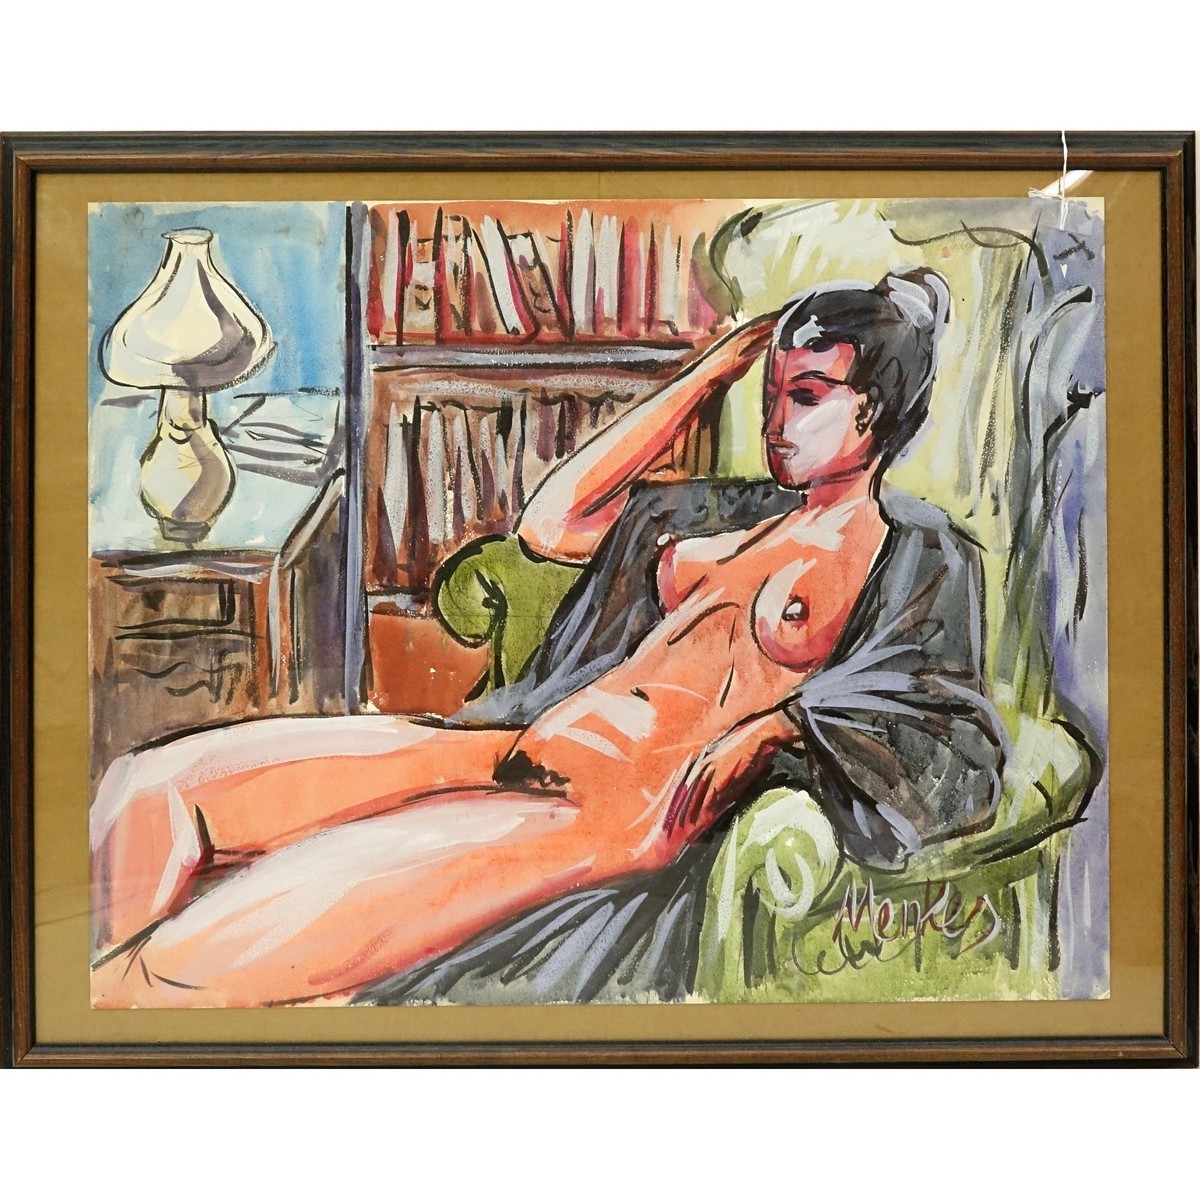 Attributed to: Sigmund Menkes, Polish (1896 - 1986) Watercolor on paper "Reclining Nude". Signed lower right.